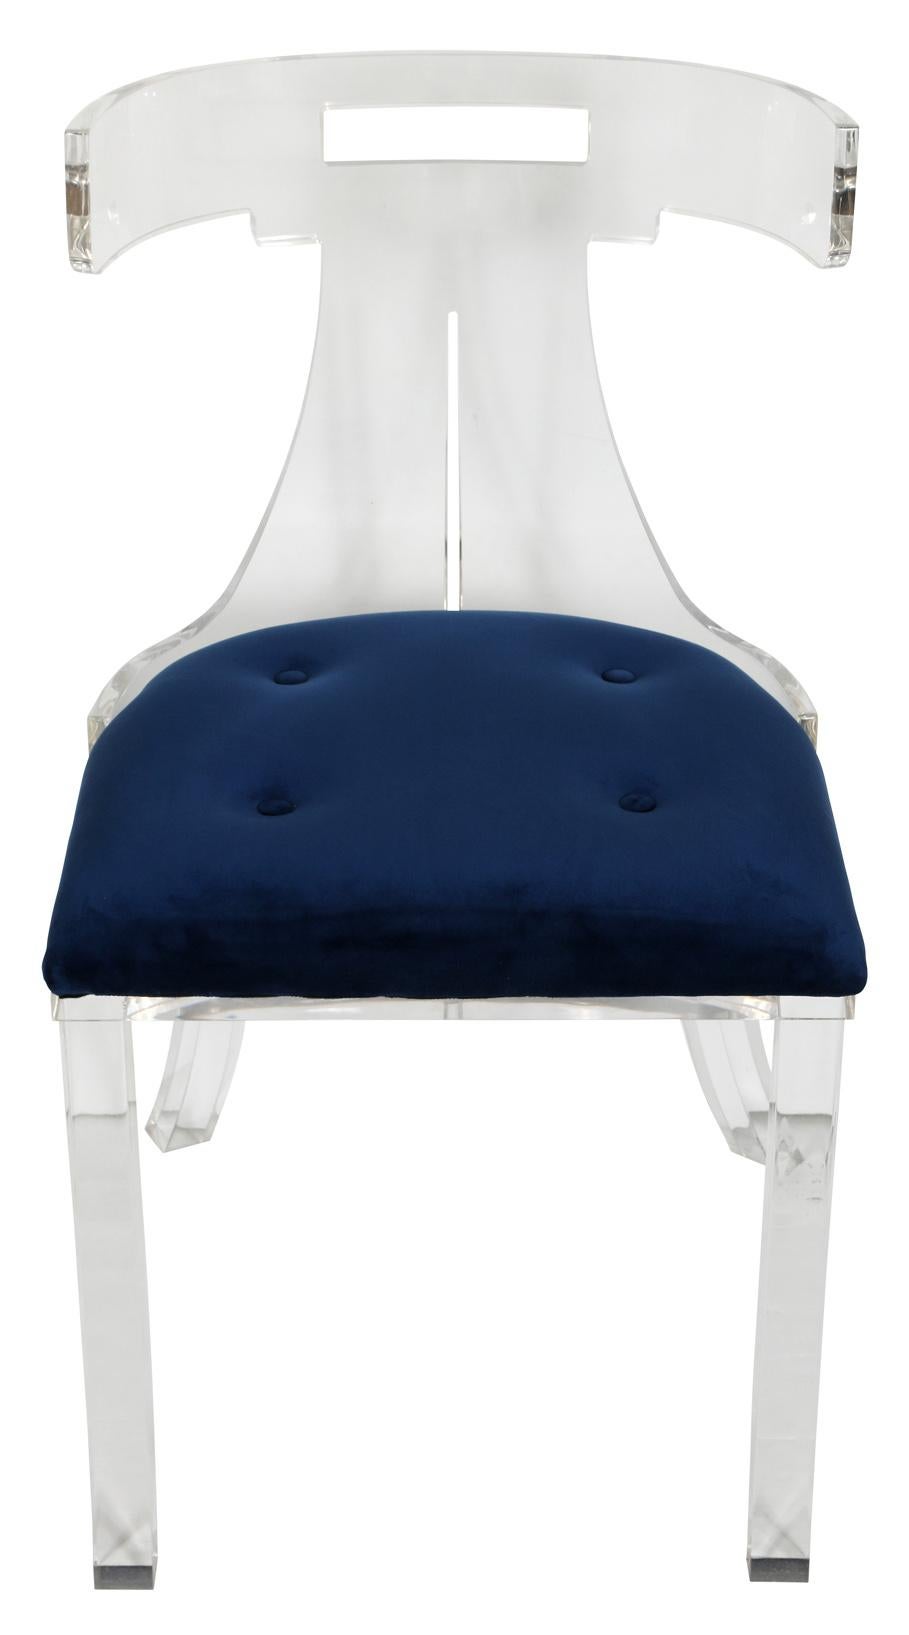 A sleek and chic side chair in lucite, with a blue upholstered seat. Although it looks light and airy, the chair has some weight to it. It would make a perfect desk chair.